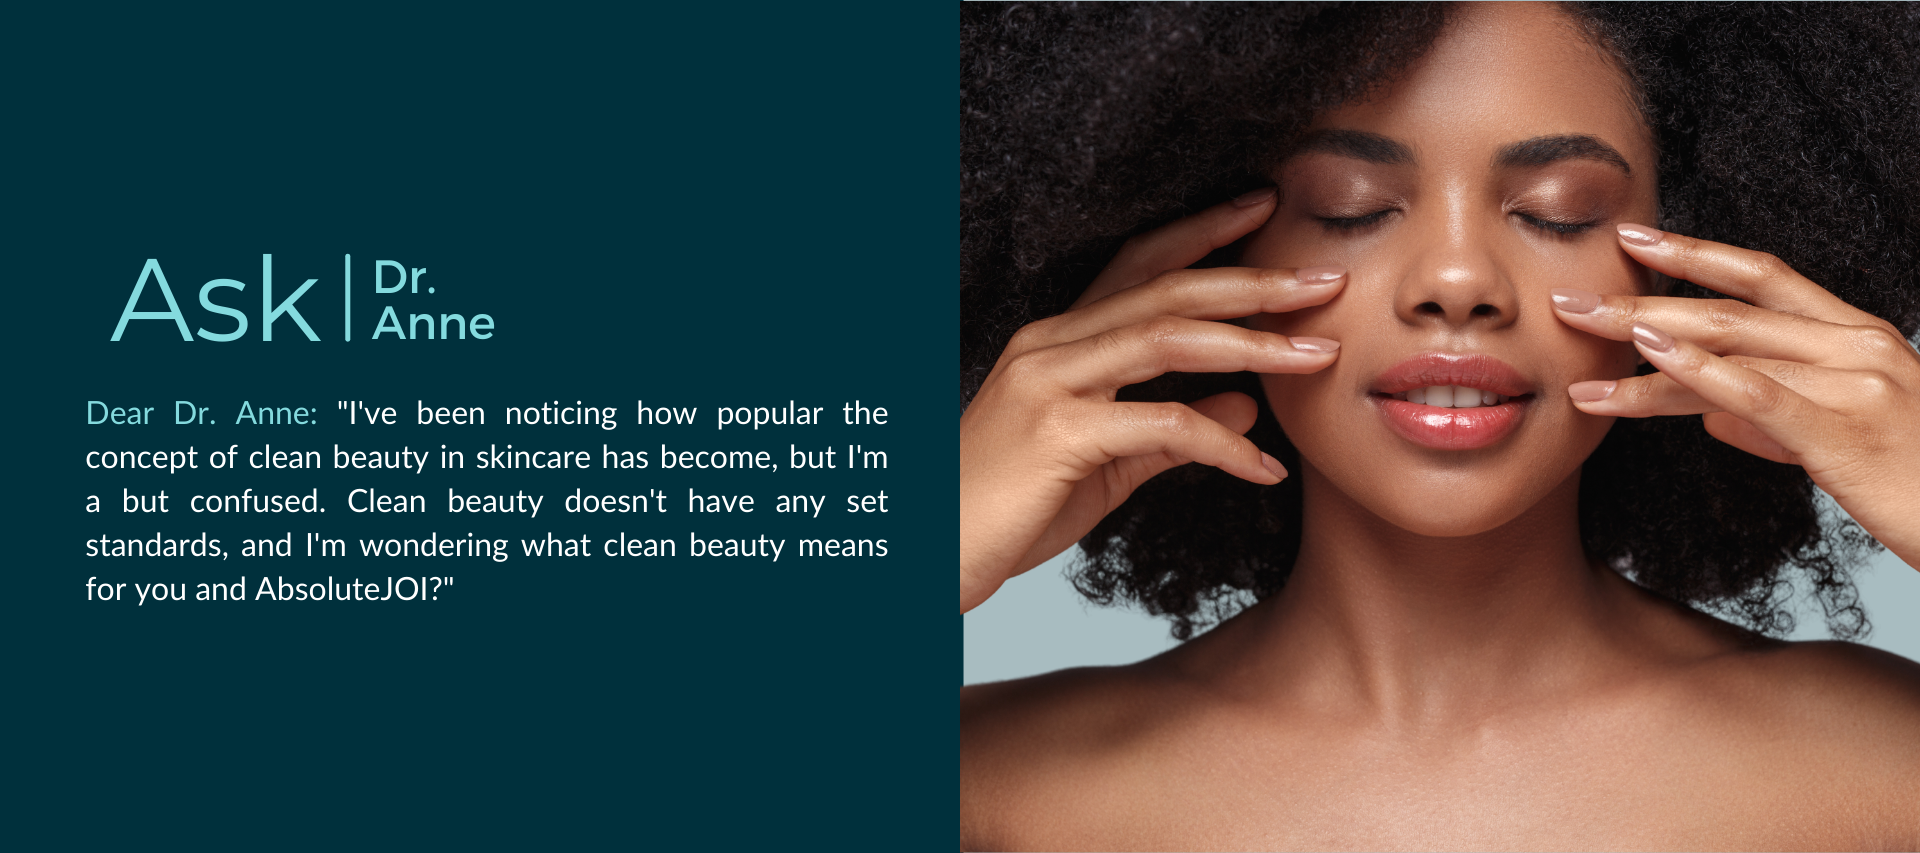 What is clean beauty?